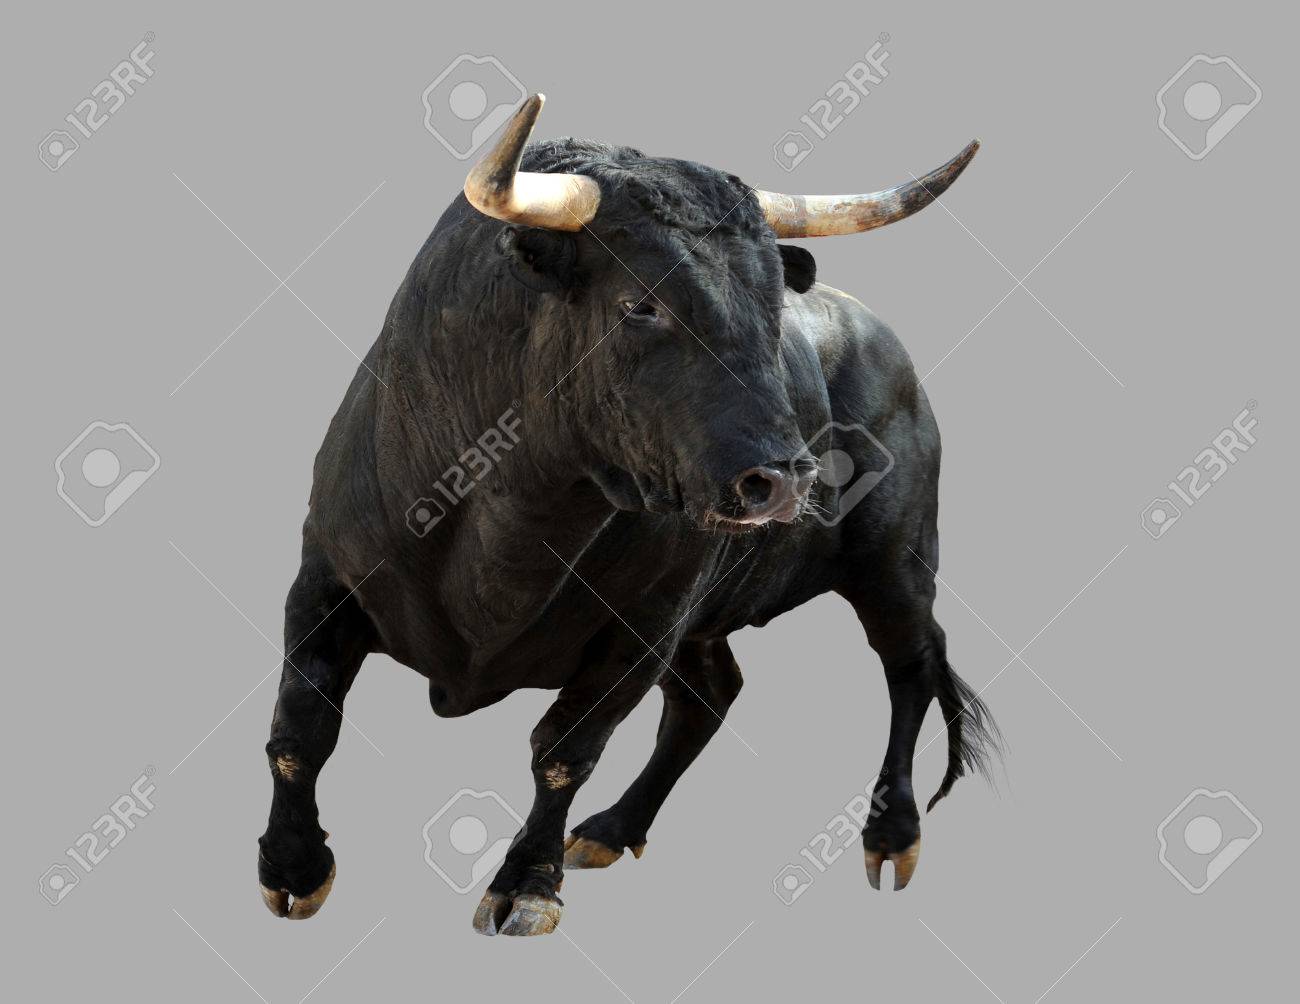 Black Bull On Isolated Gray Background Stock Photo Picture And